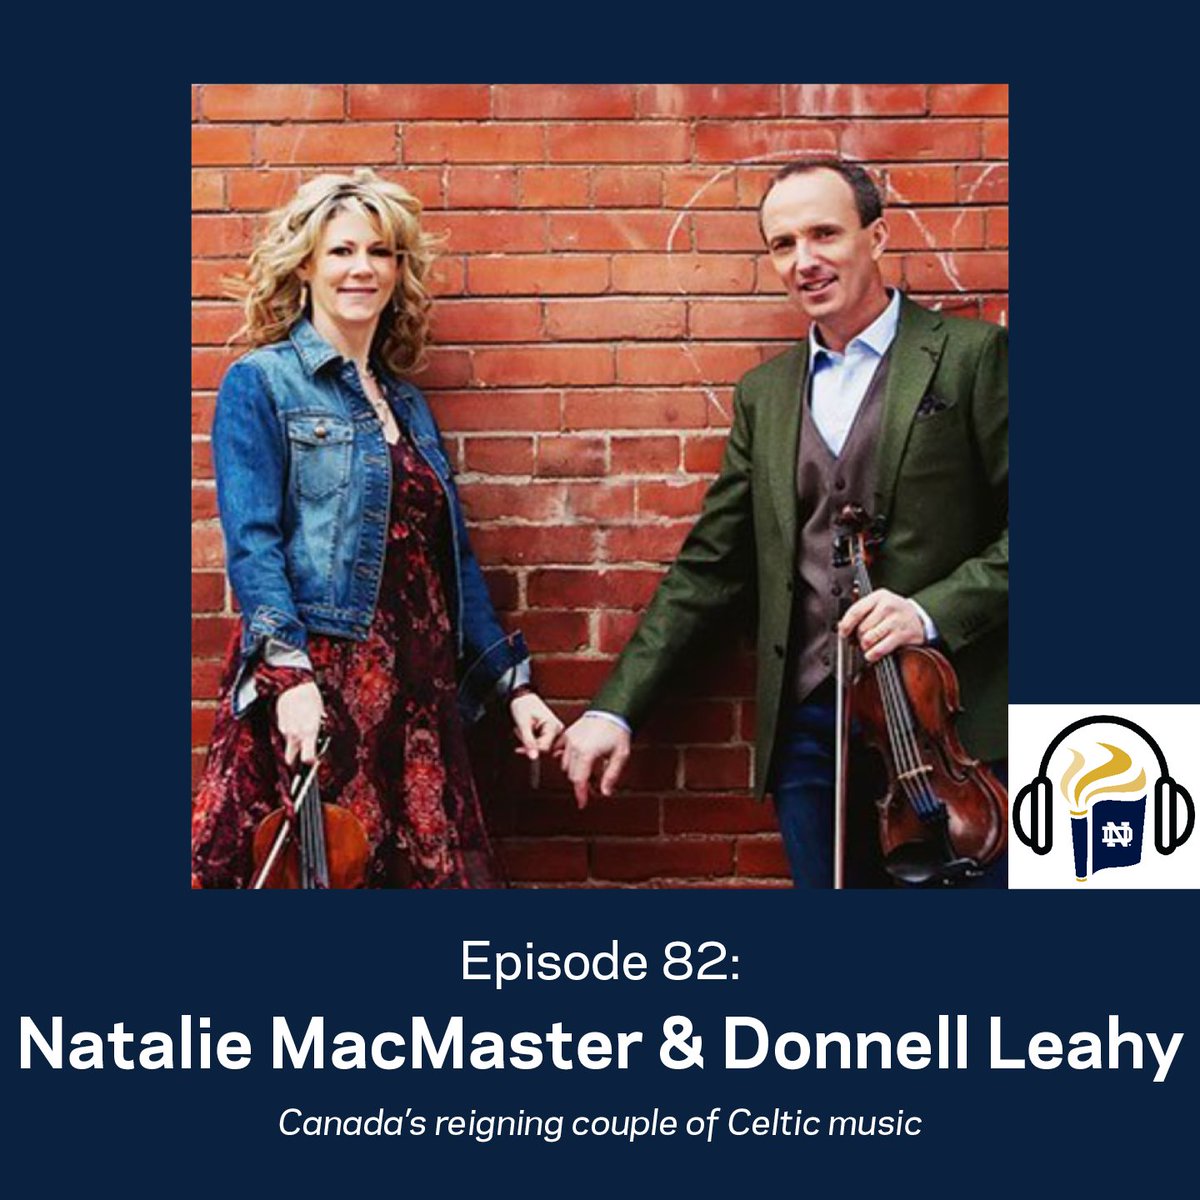 New podcast alert! Ethics and Culture Cast #82 is a wonderful chat with Natalie MacMaster and Donnell Leahy, Canada's reigning couple of Celtic music – give it a listen! share.fireside.fm/episode/oLpI9p…